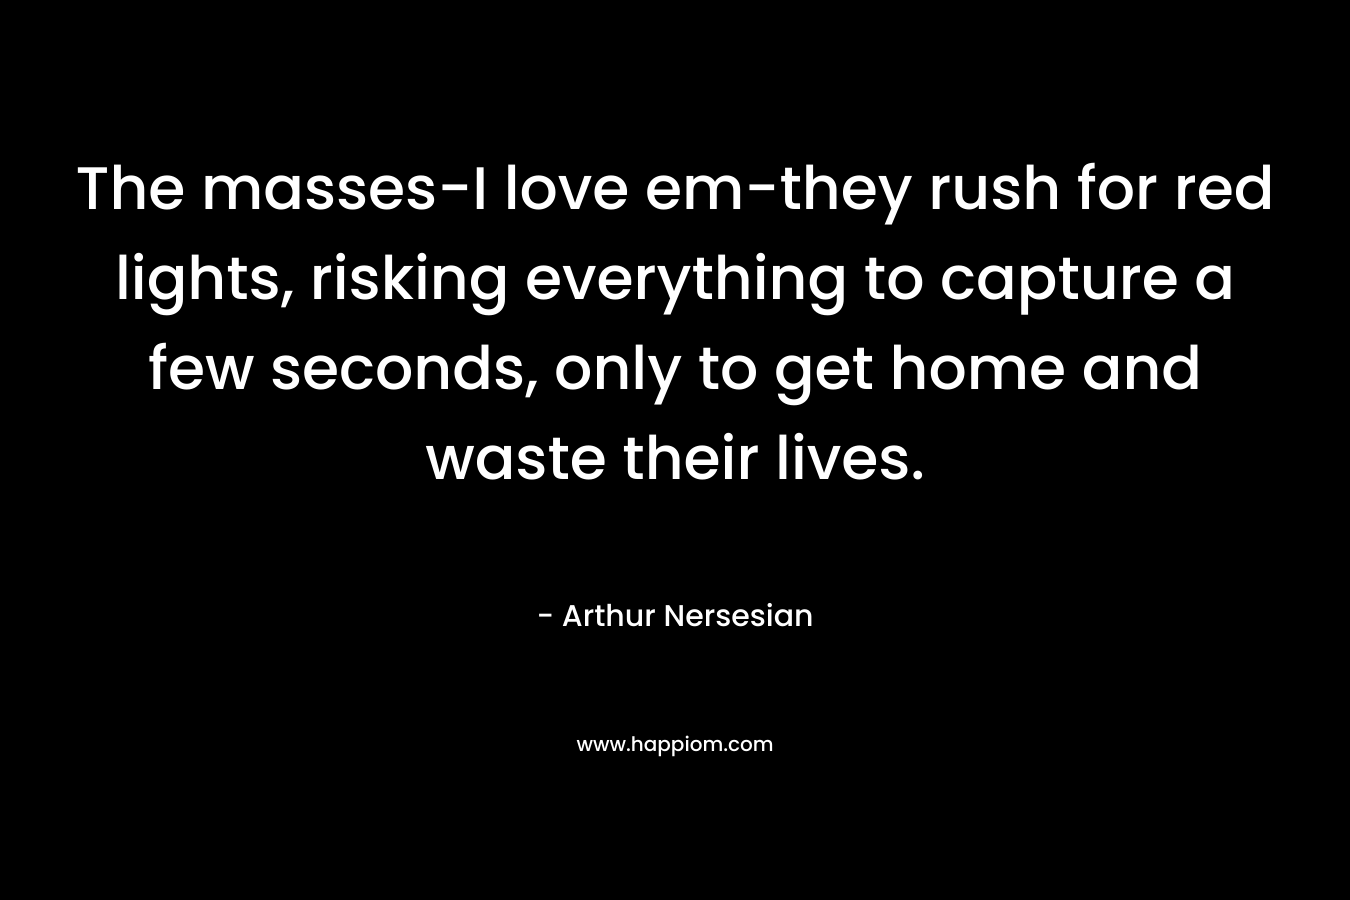 The masses-I love em-they rush for red lights, risking everything to capture a few seconds, only to get home and waste their lives. – Arthur Nersesian